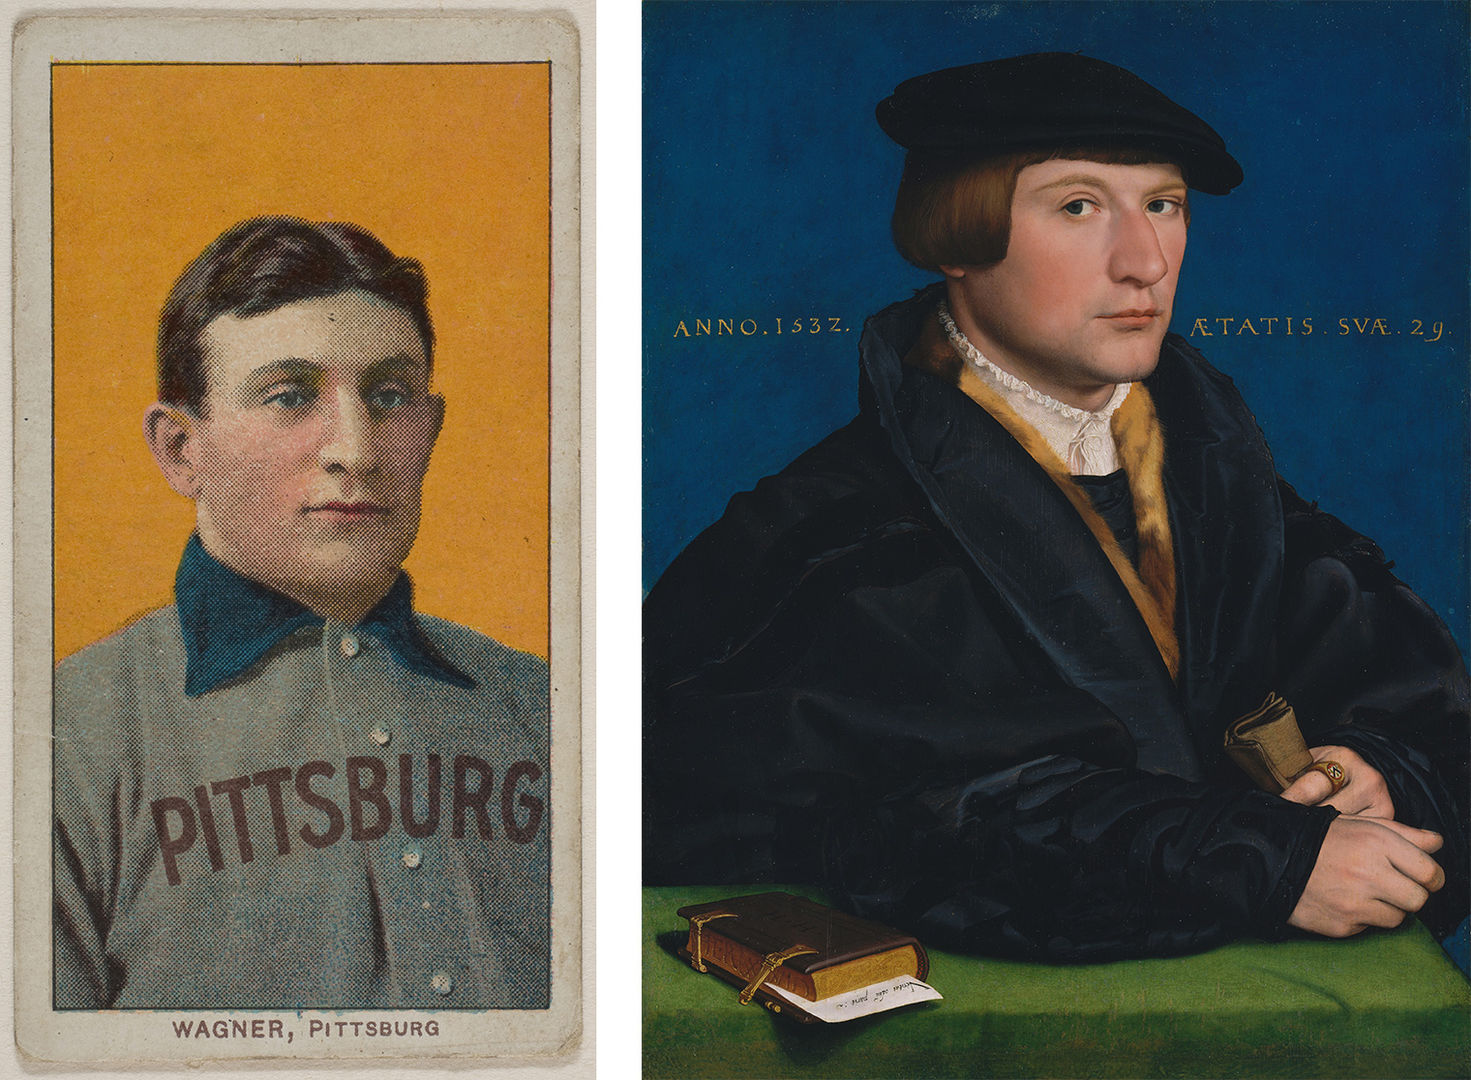 At left, baseball card showing a young man with a vacant expression. His blue-collared, gray shirt reads "PITTSBURG" across the front. At right, 16th century portrait of a finely dressed man. He gazes directly at the viewer, and his arms are placed atop a table also carrying a book. 